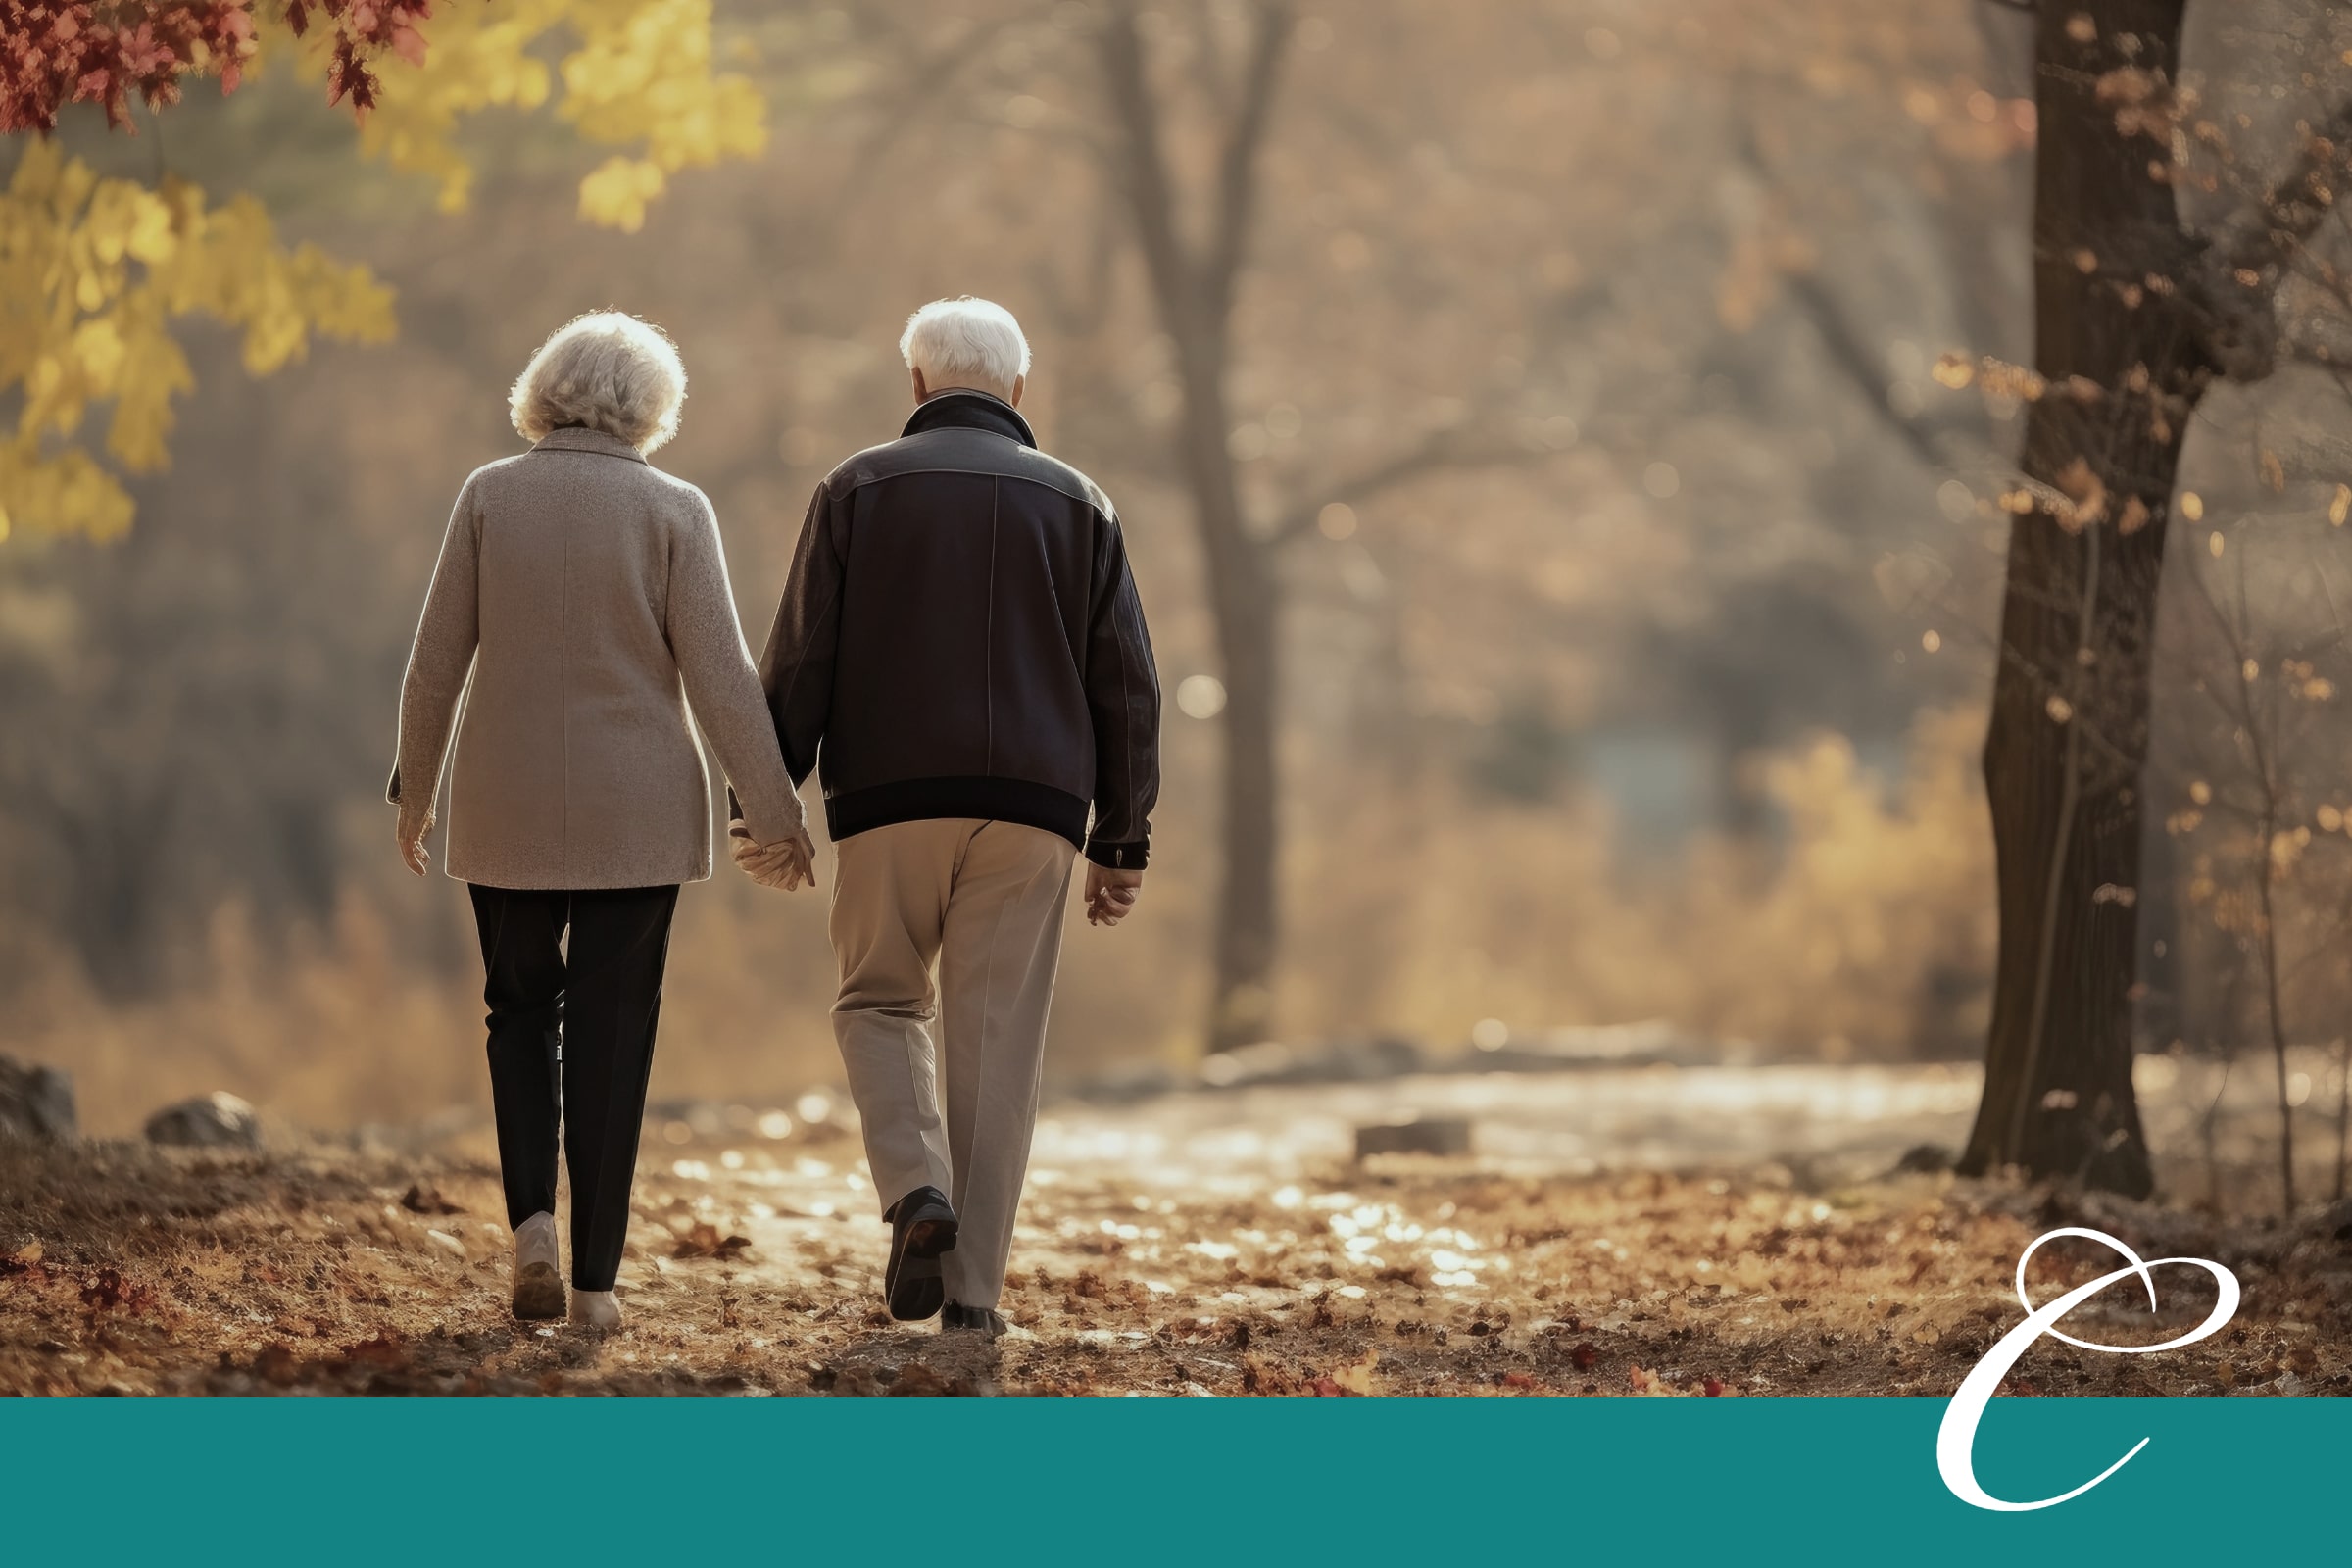 Don’t leave your wellness to chance, prepare for a vibrant autumn of life with these retirement healthcare planning tips.